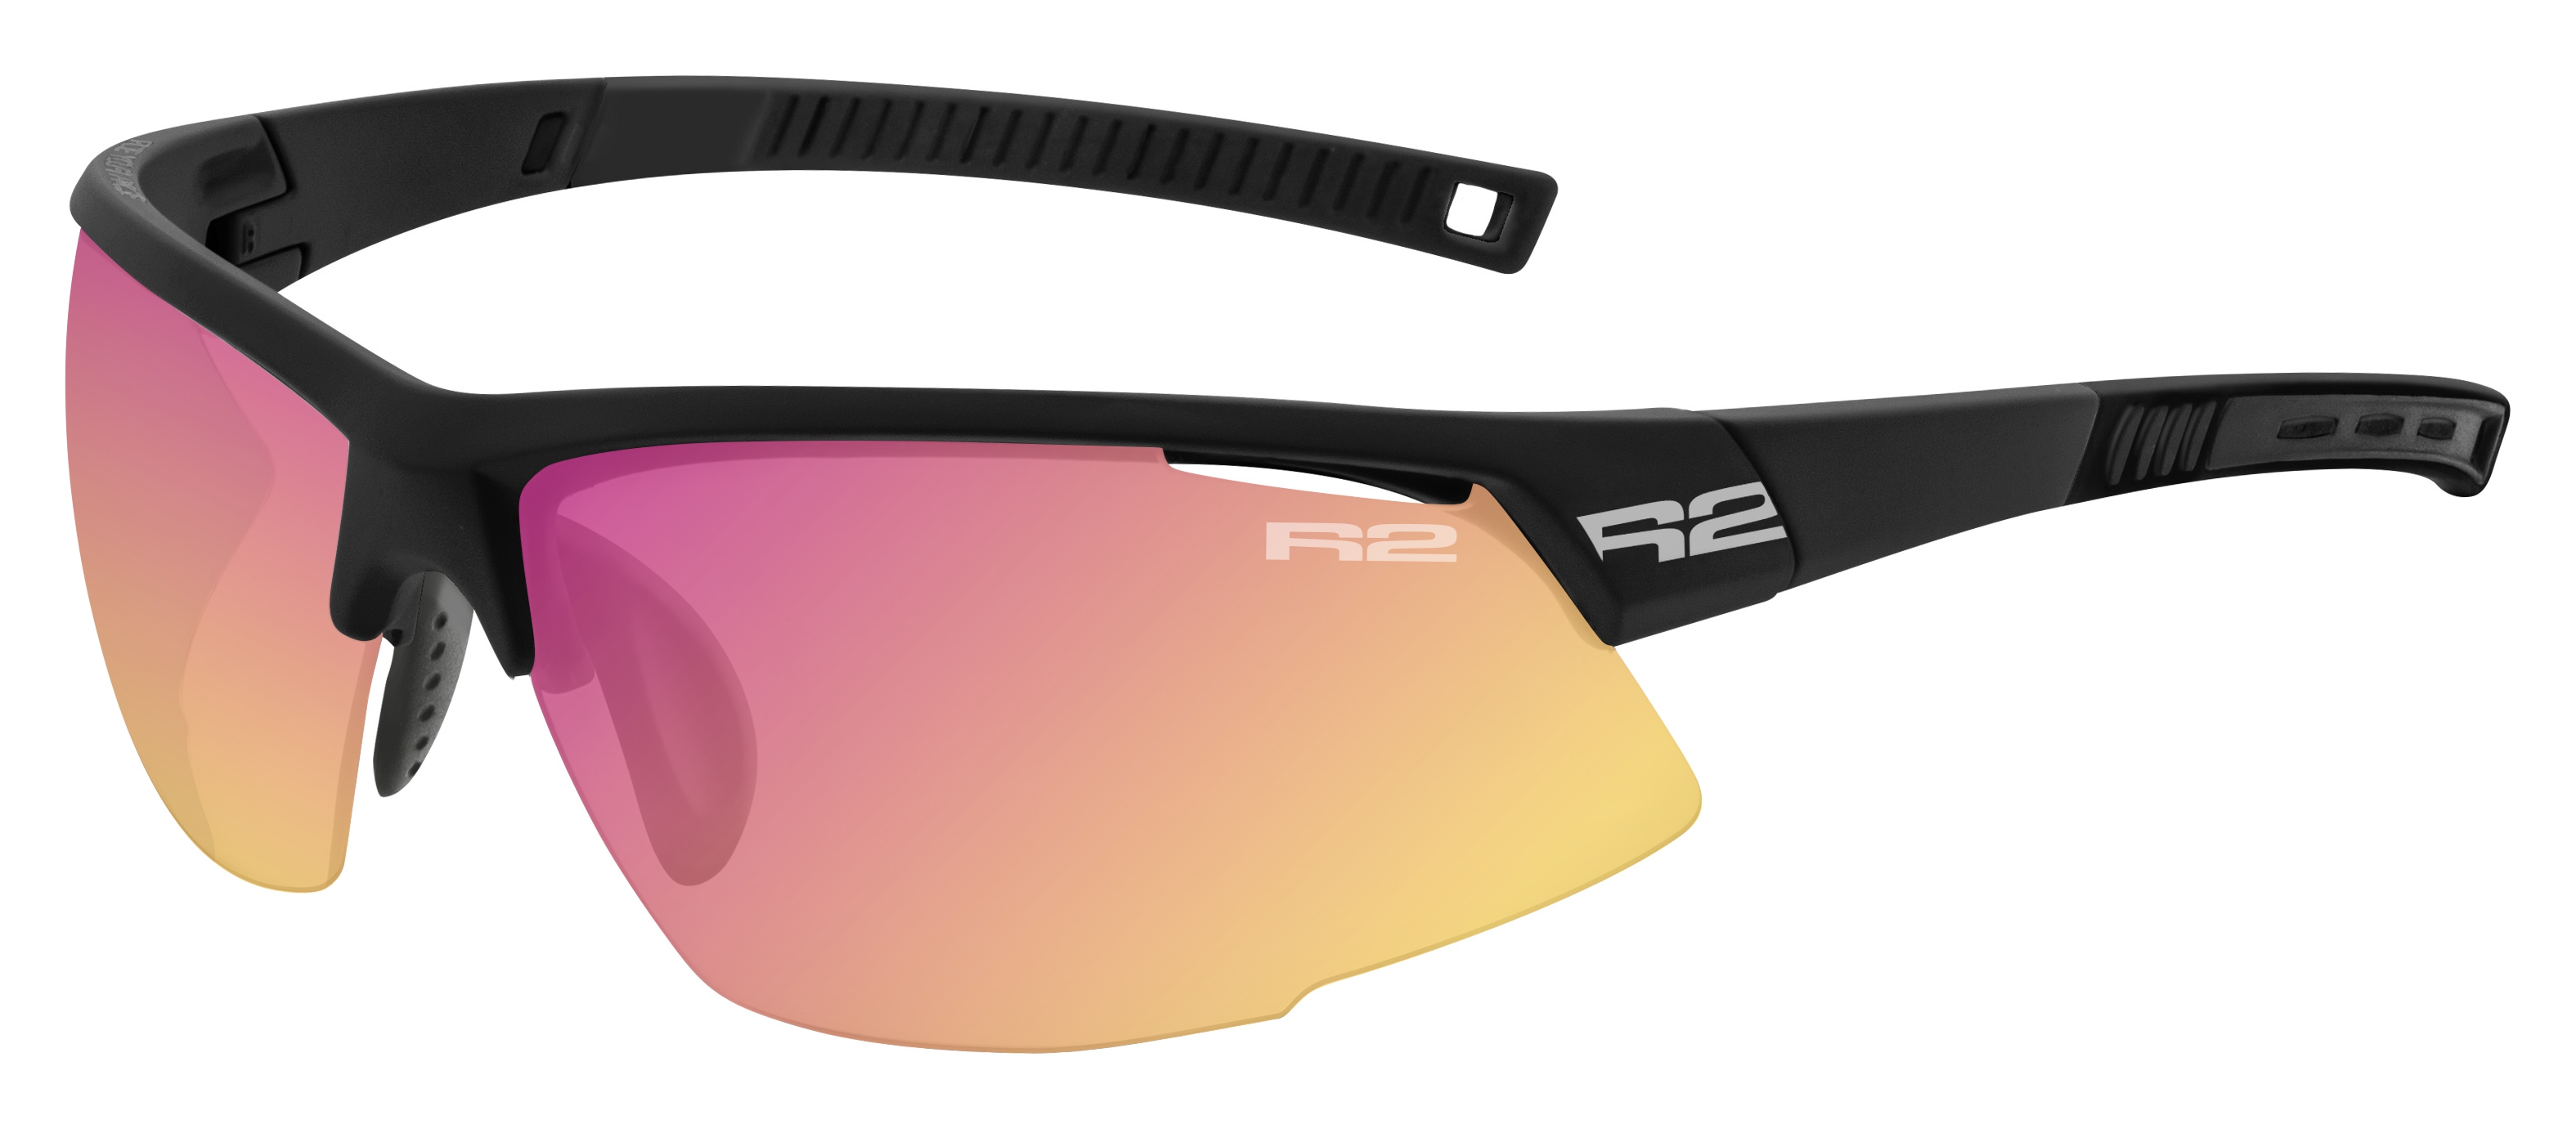 Photochromatic sunglasses  R2 RACER AT063A9